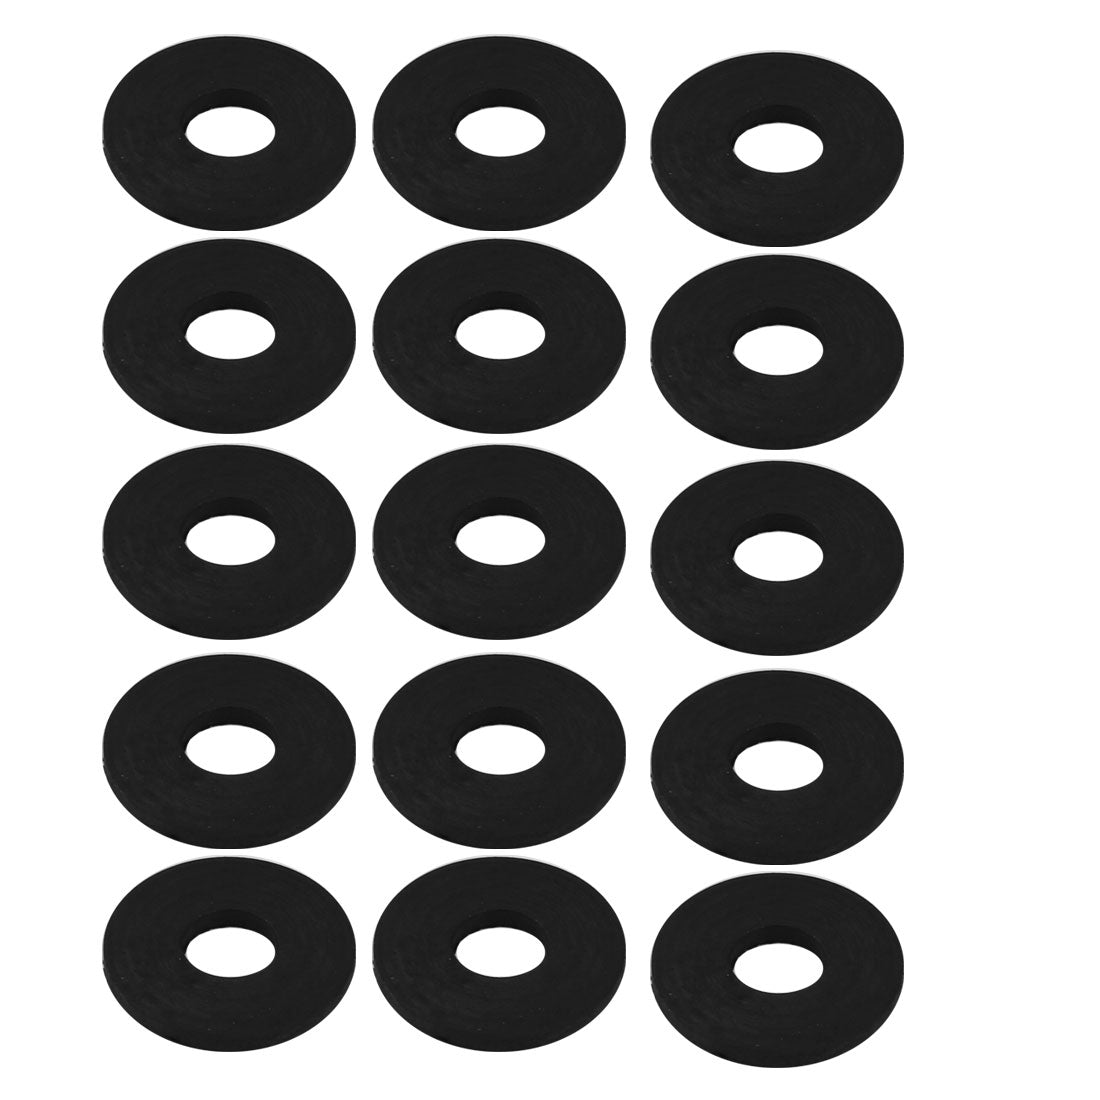 Uxcell Uxcell 15pcs Black Color Rubber Round Flat Washer Assortment Size 14x24x3mm Flat Washer